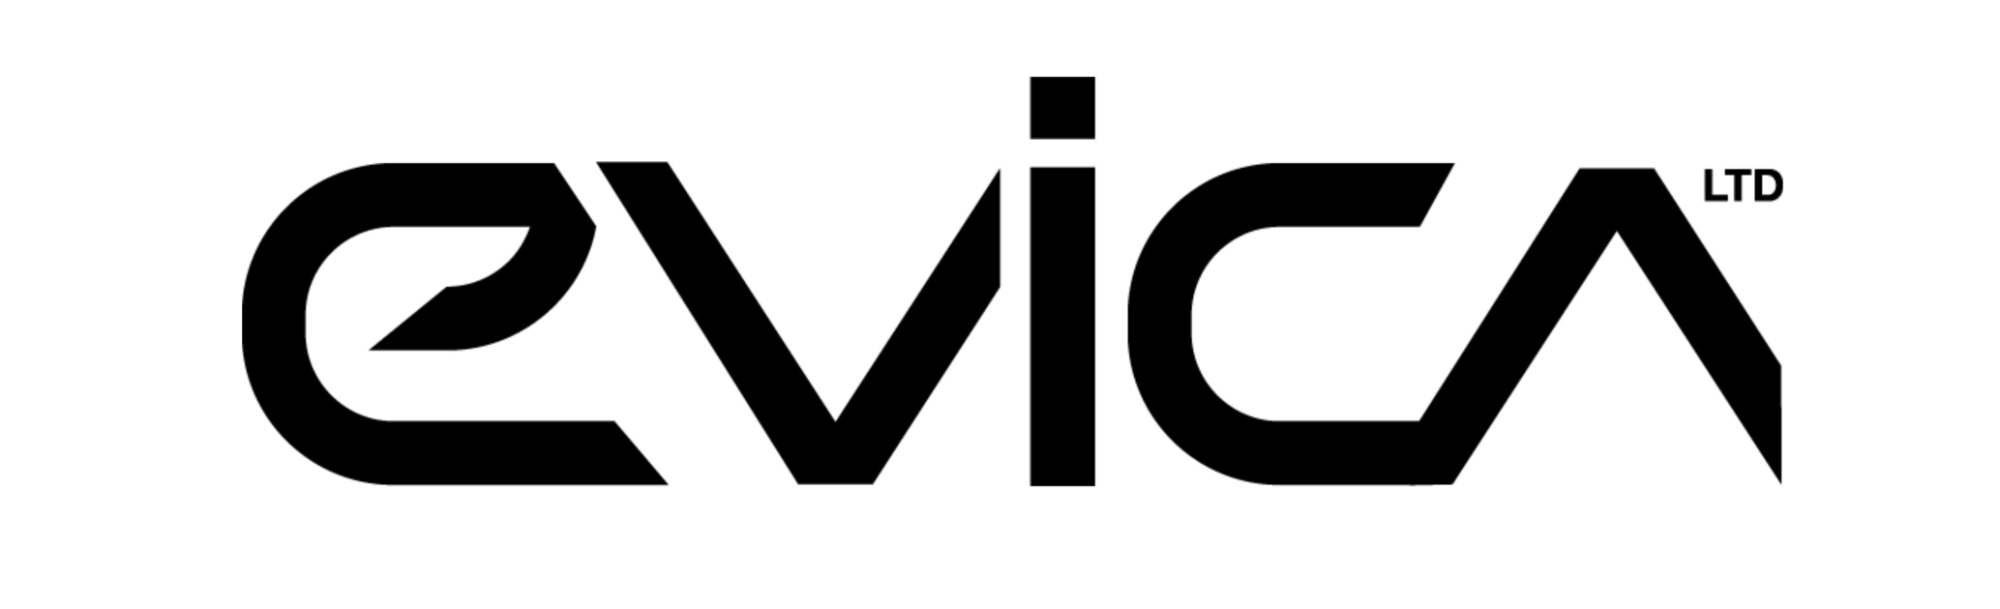 Evica Limited Logo